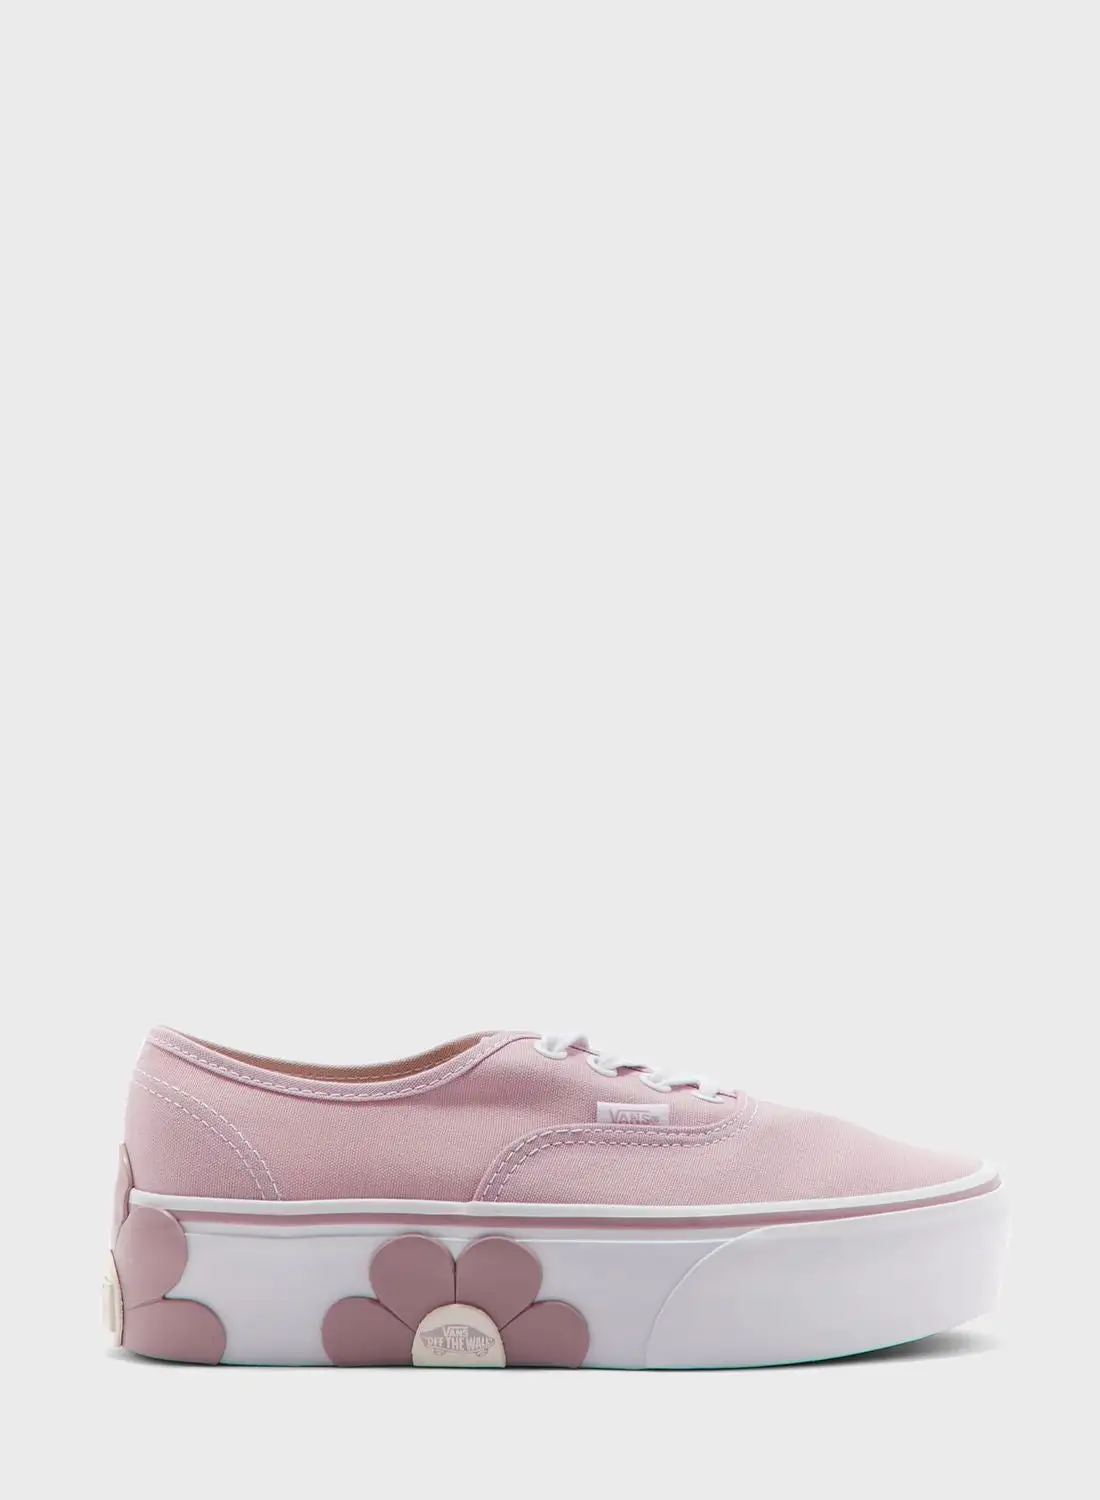 VANS Authentic Stackform Osf